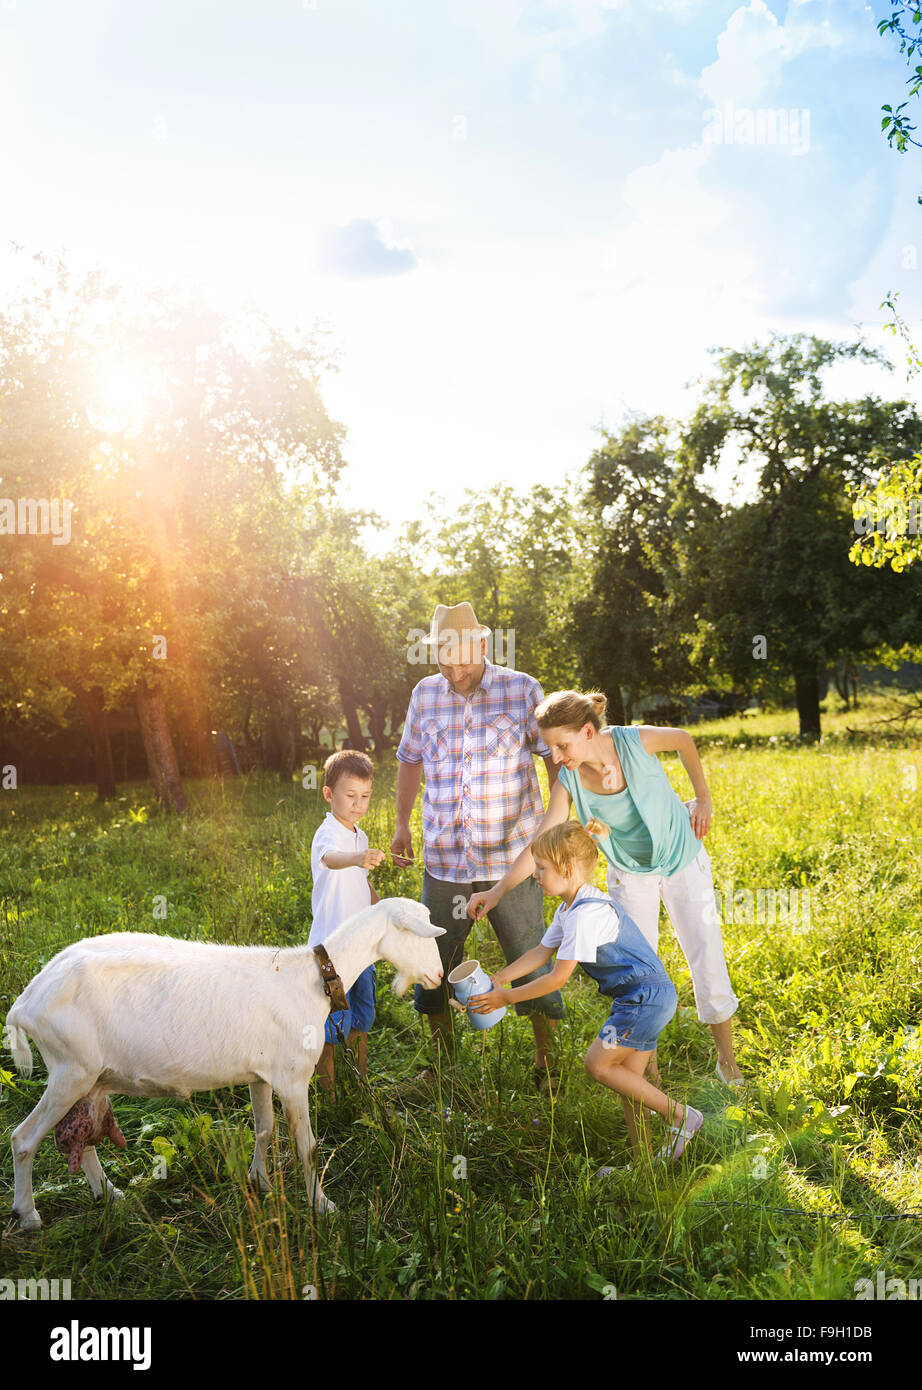 Happy young family spending time together outside in green nature with a goat. Stock Photo